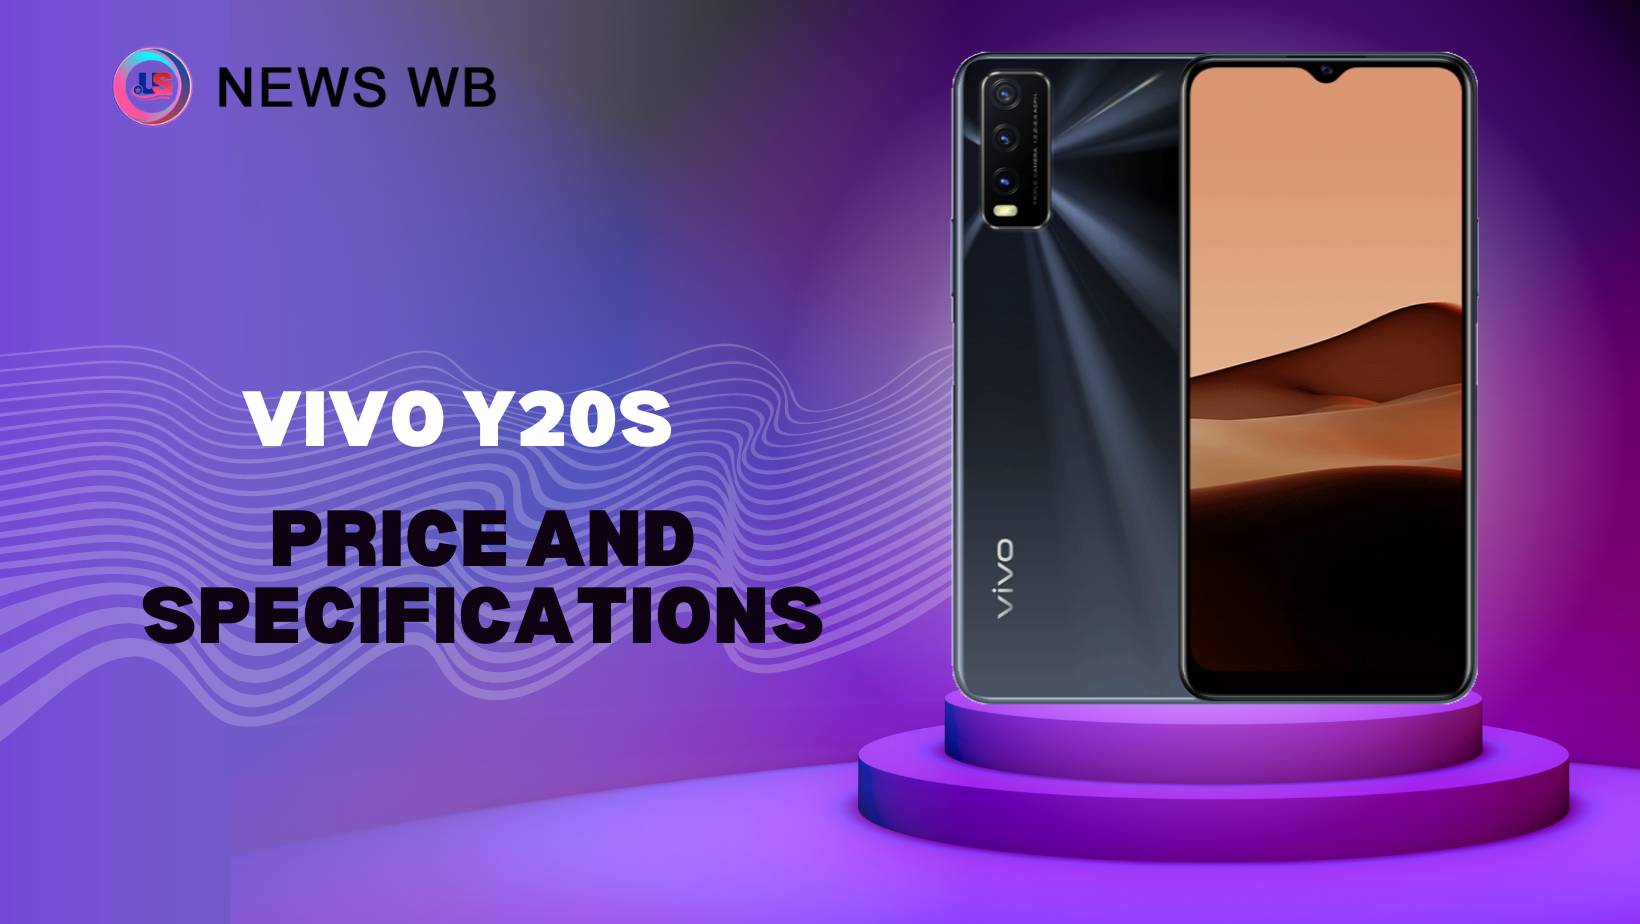 Vivo Y20s Price and Specifications